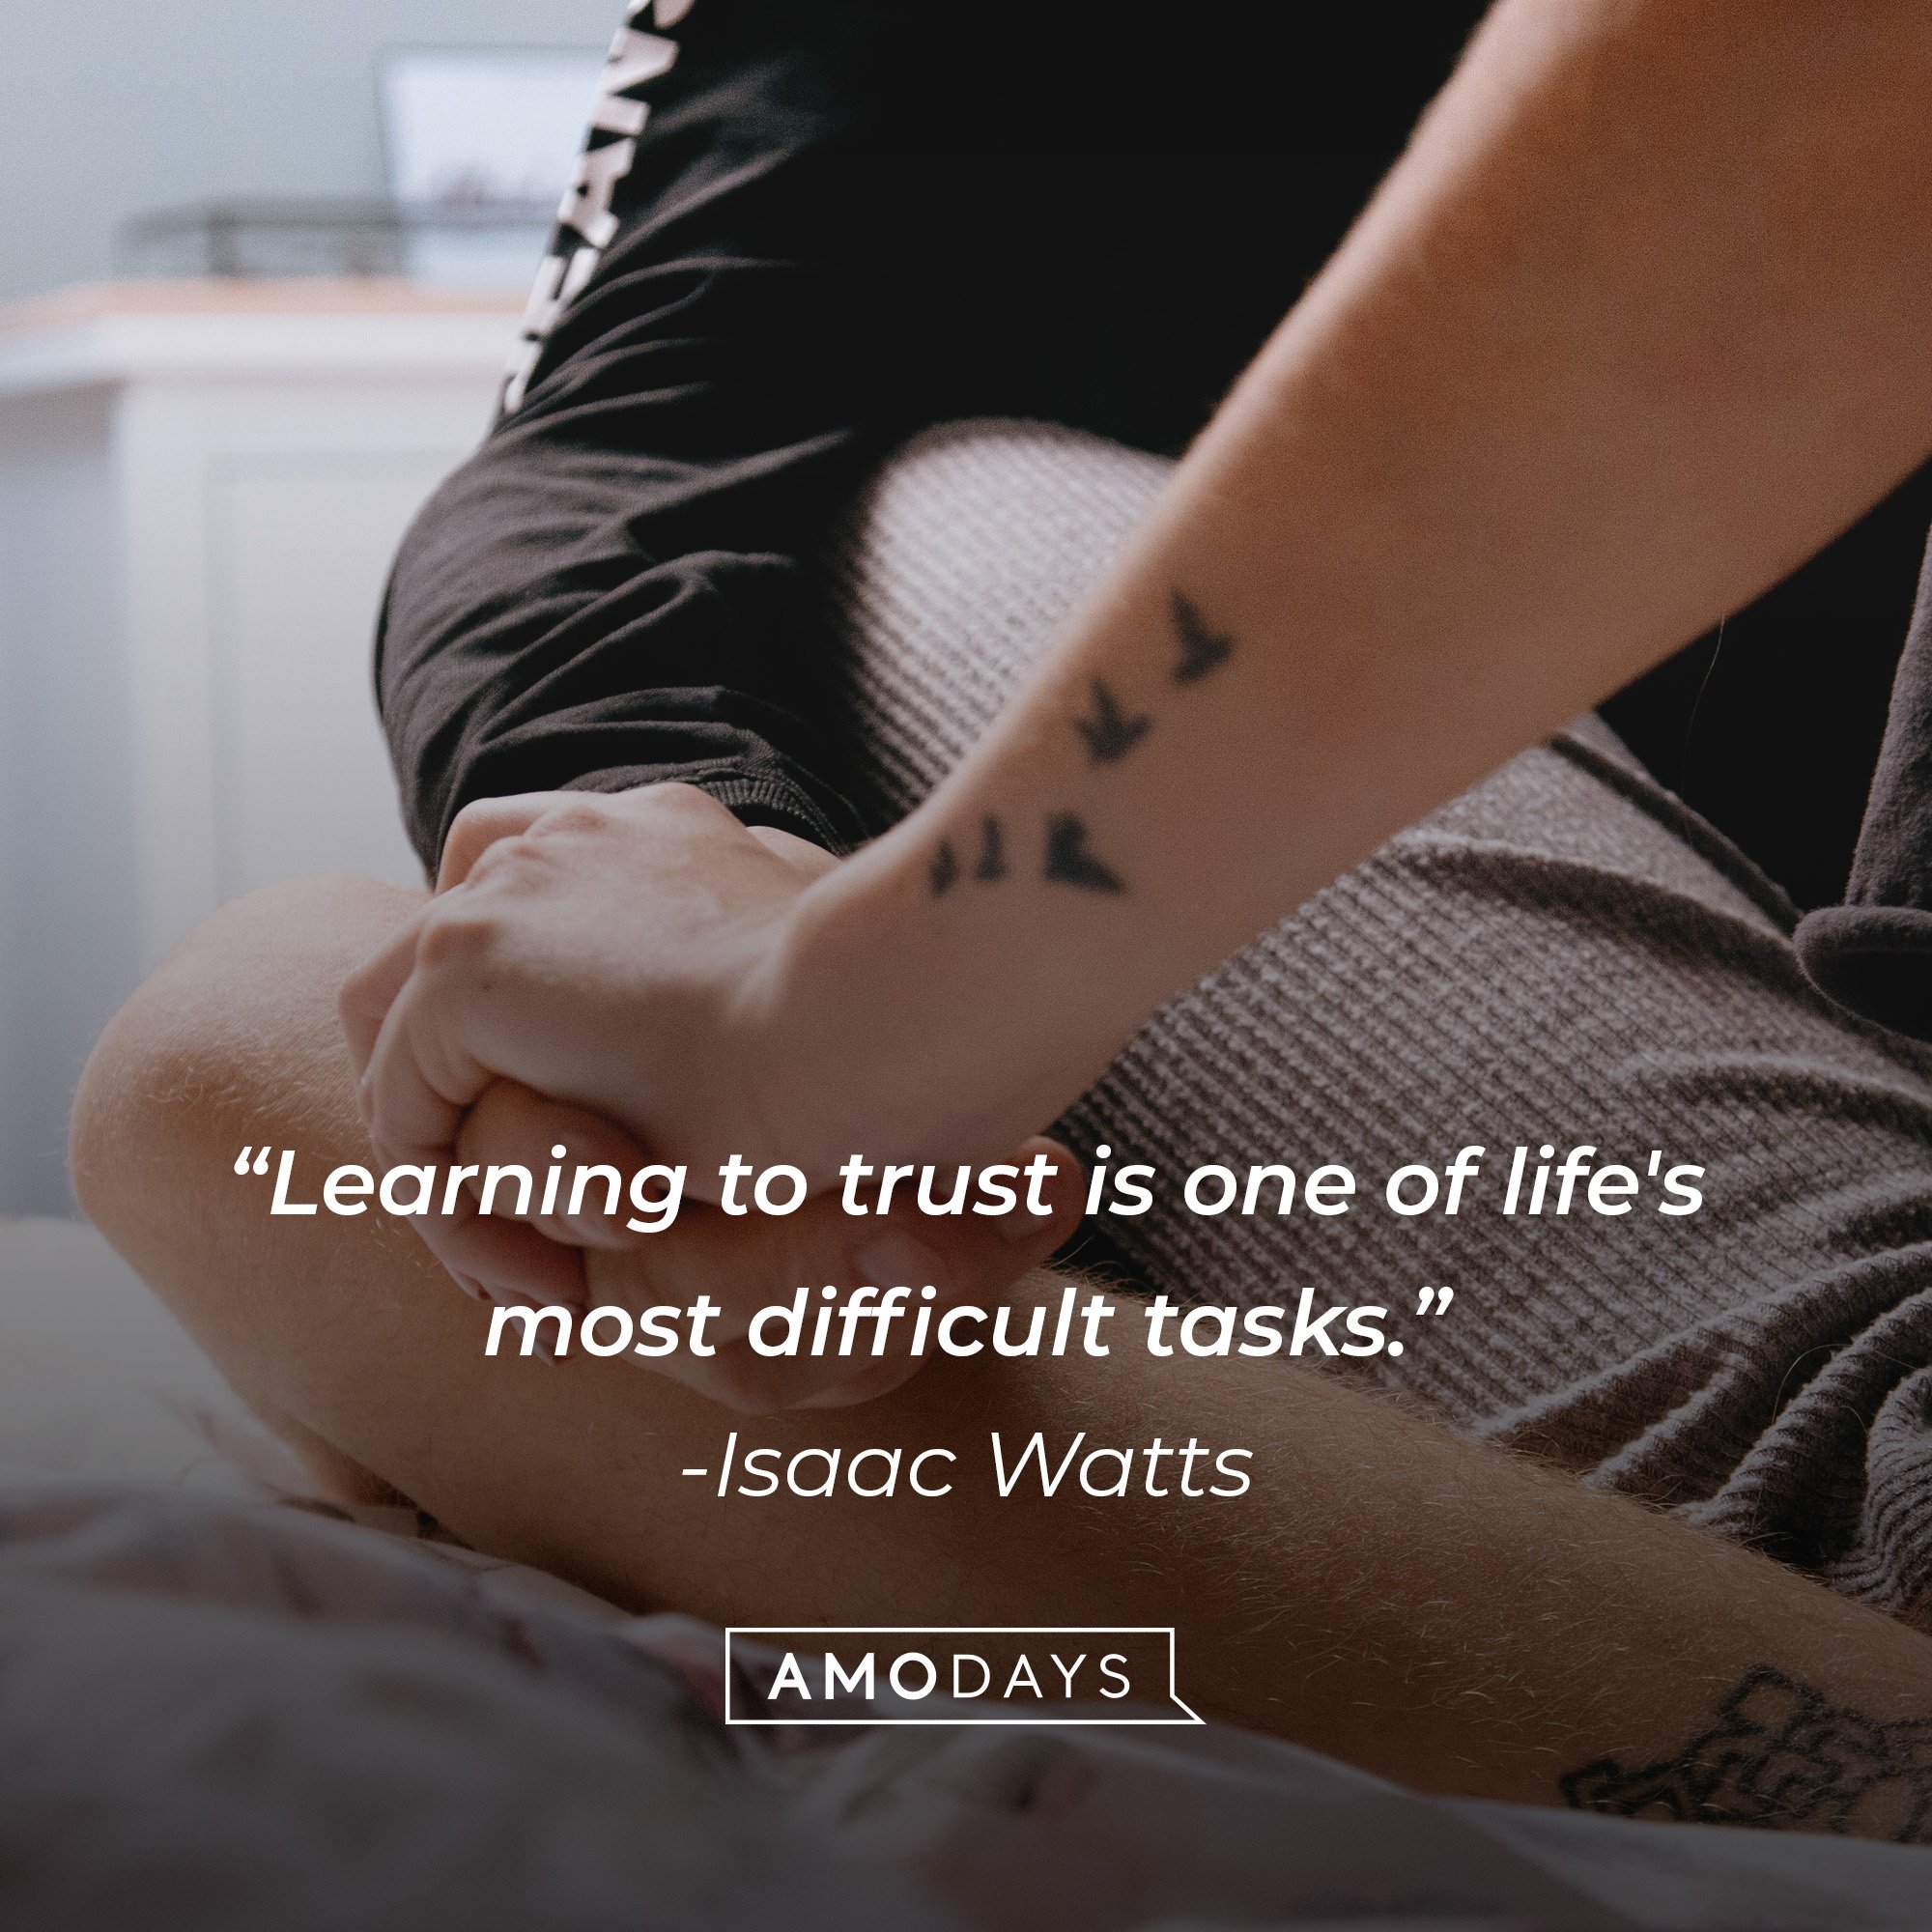 Isaac Watts’ quote: “Learning to trust is one of life's most difficult tasks.” | Image: AmoDays